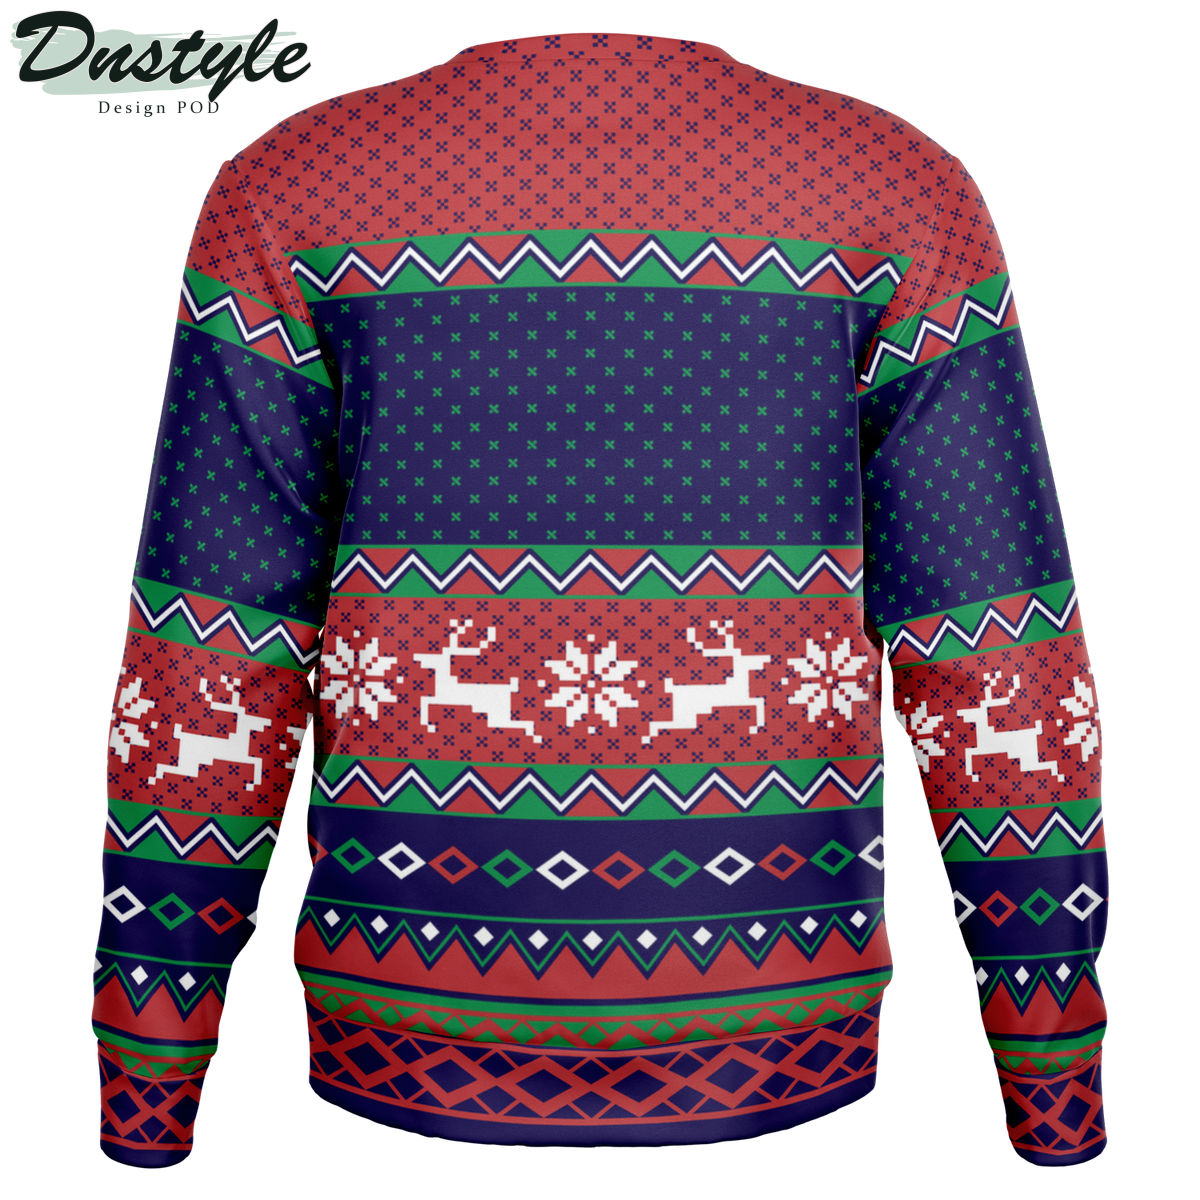 It's The Most Wonderful Time For A Beer Ugly Christmas Sweater